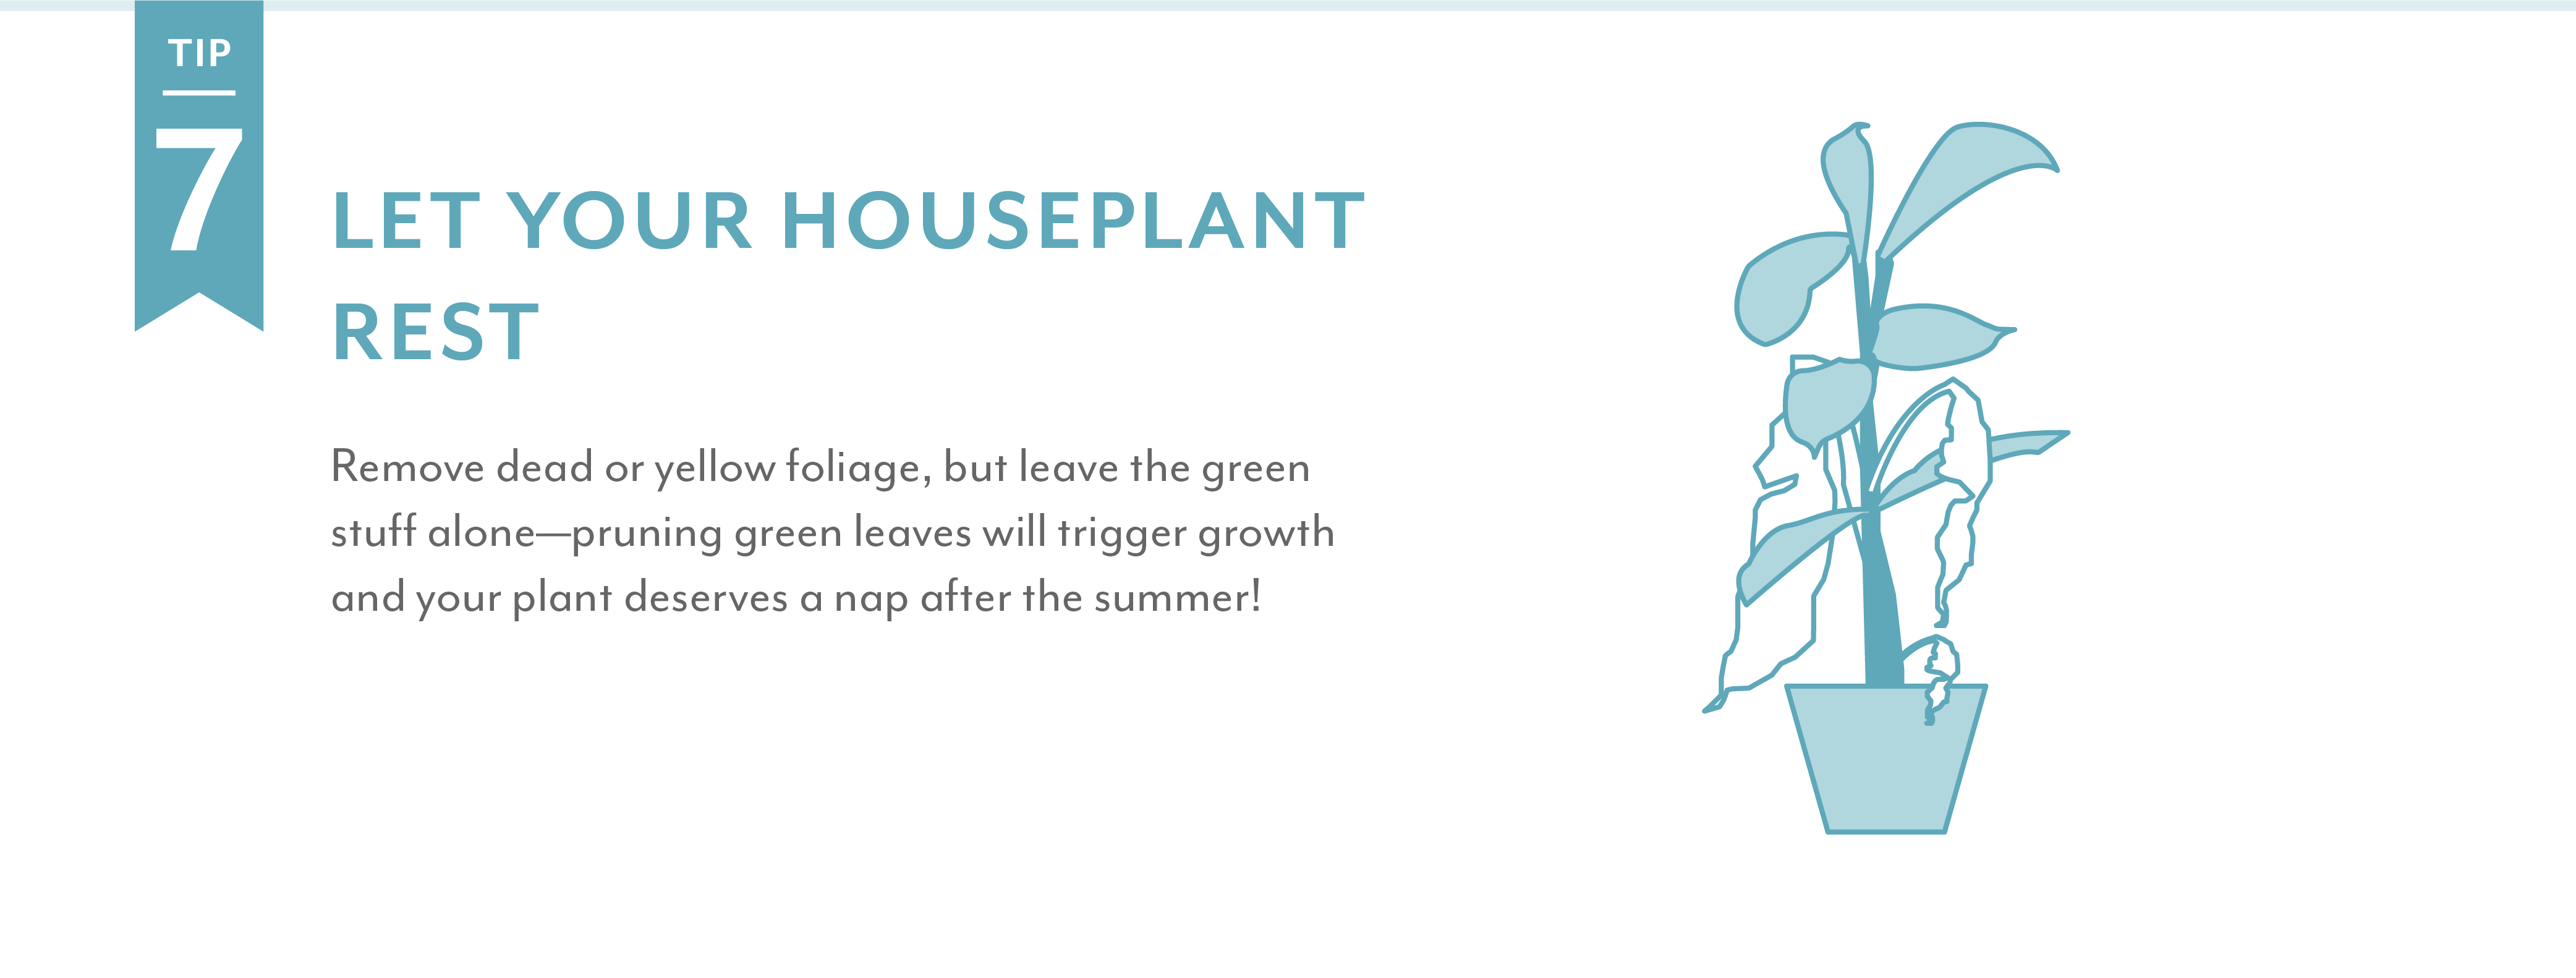 Salisbury Greenhouse | Let your houseplant rest Remove dead or yellow foliage, but leave the green stuff aloneâ€”pruning green leaves will trigger growth and your plant deserves a nap after the summer!